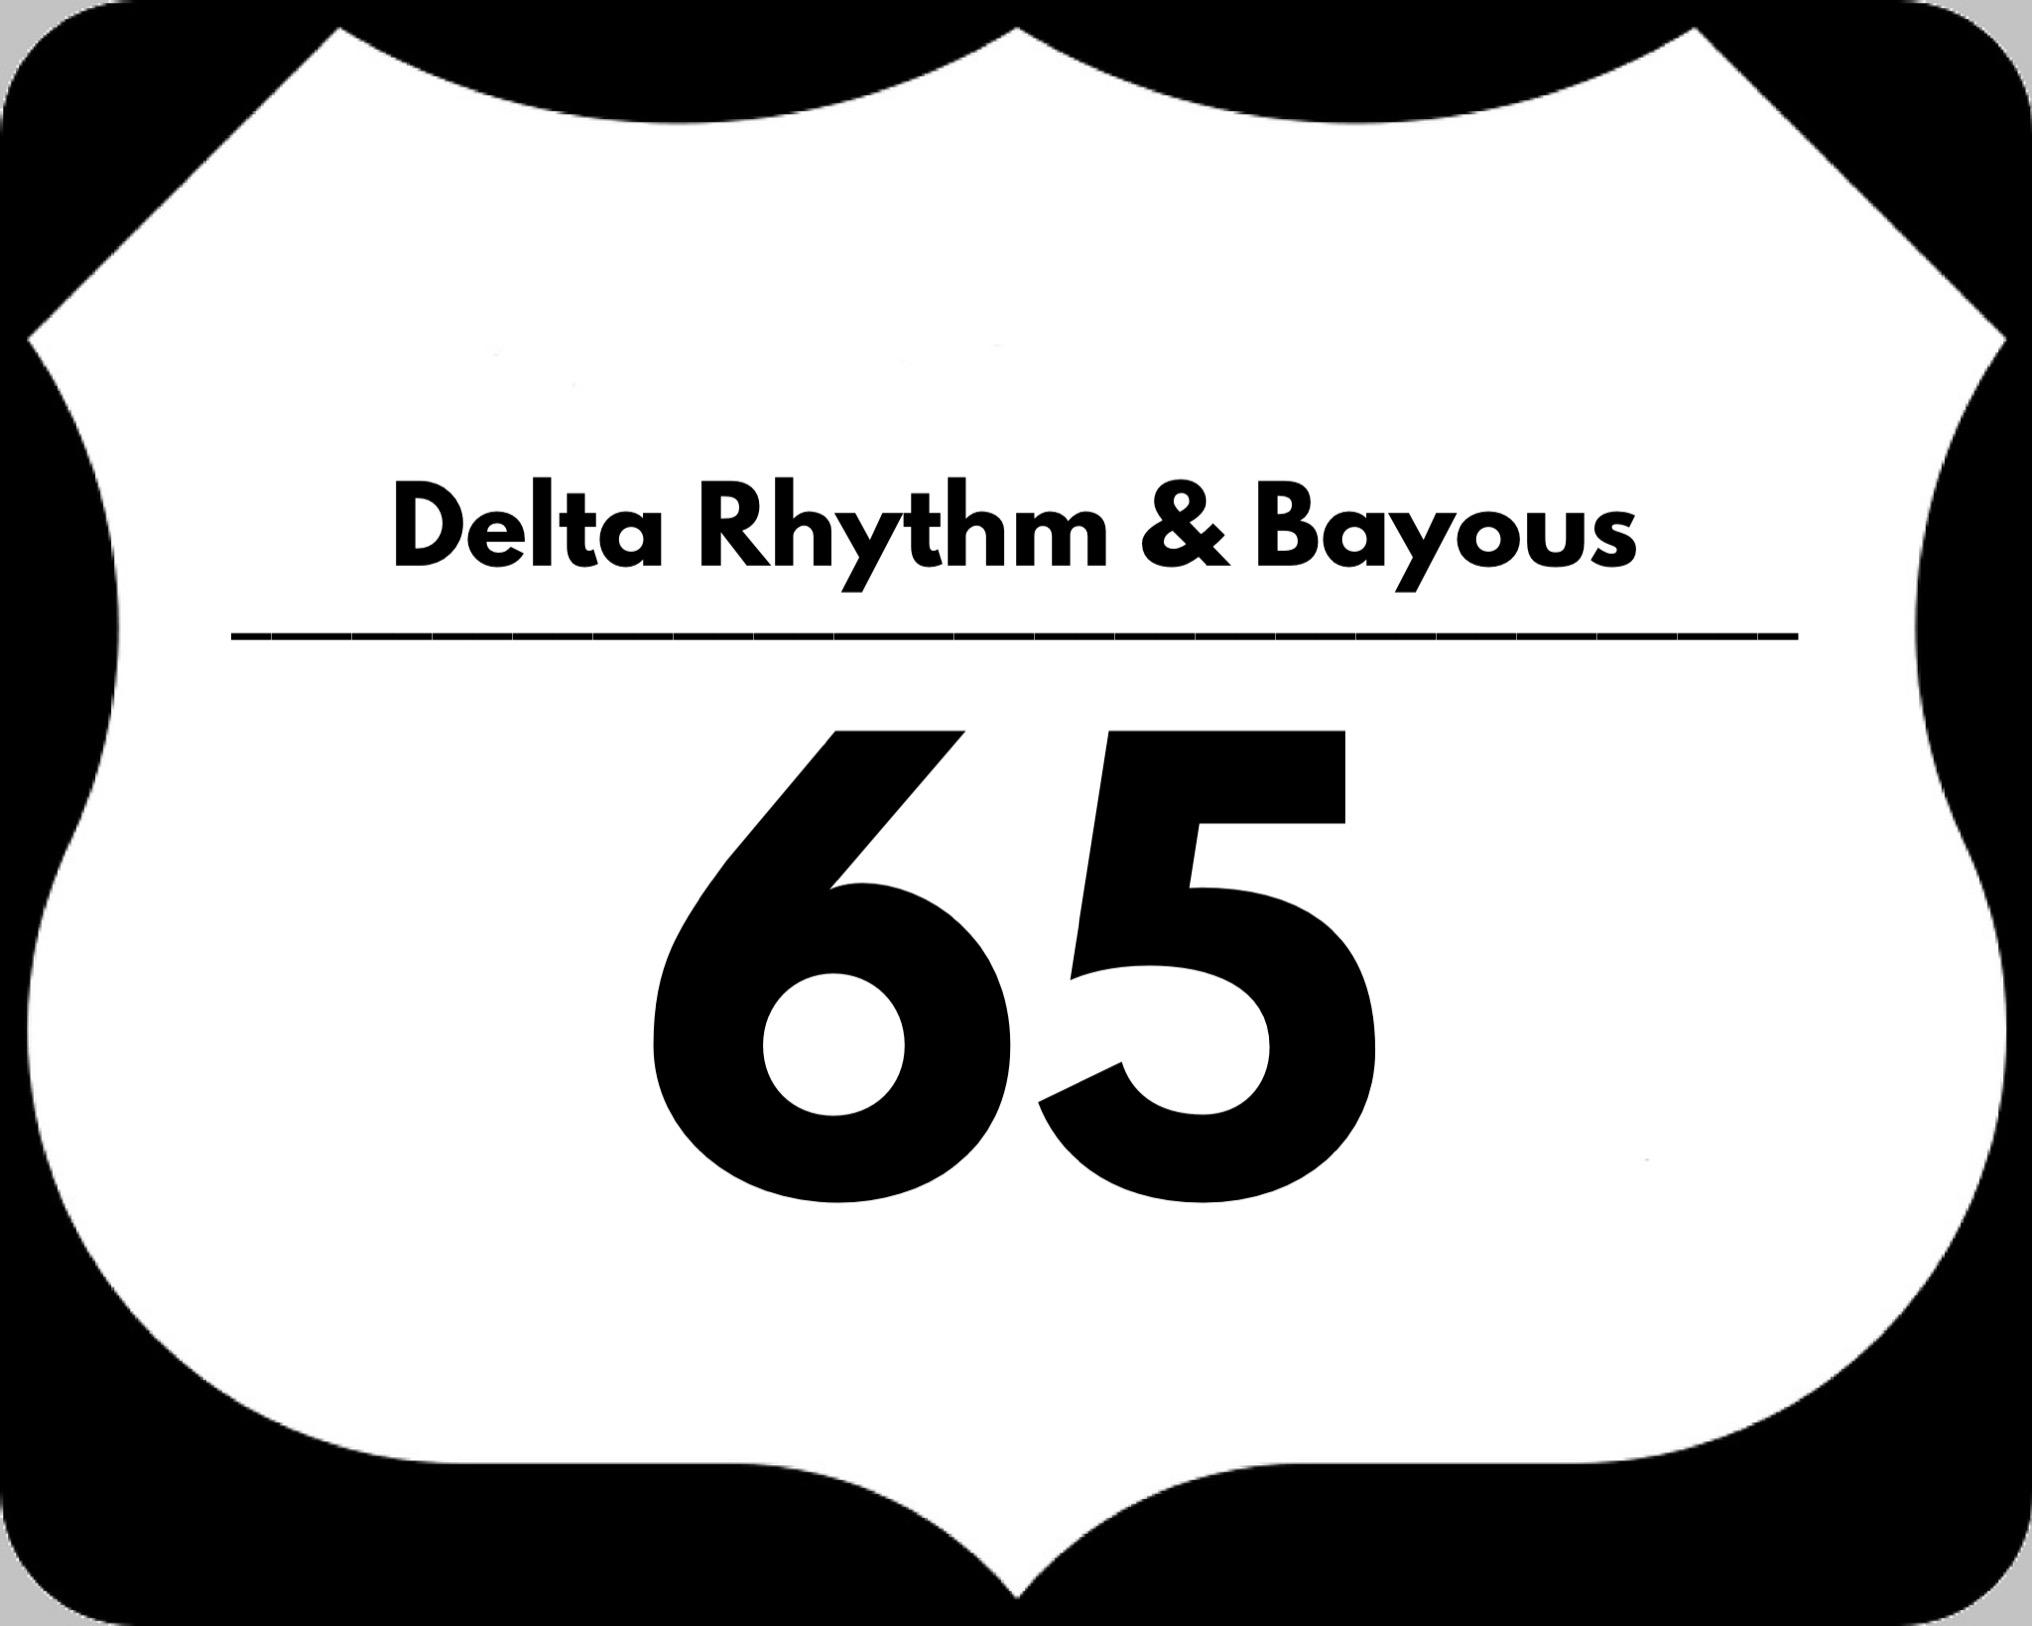 Highway sign image with “Delta Rhythm & Bayous” (instead of Route) and “65.” Credit/copyright pbjunction.com and PB Junction, LLC